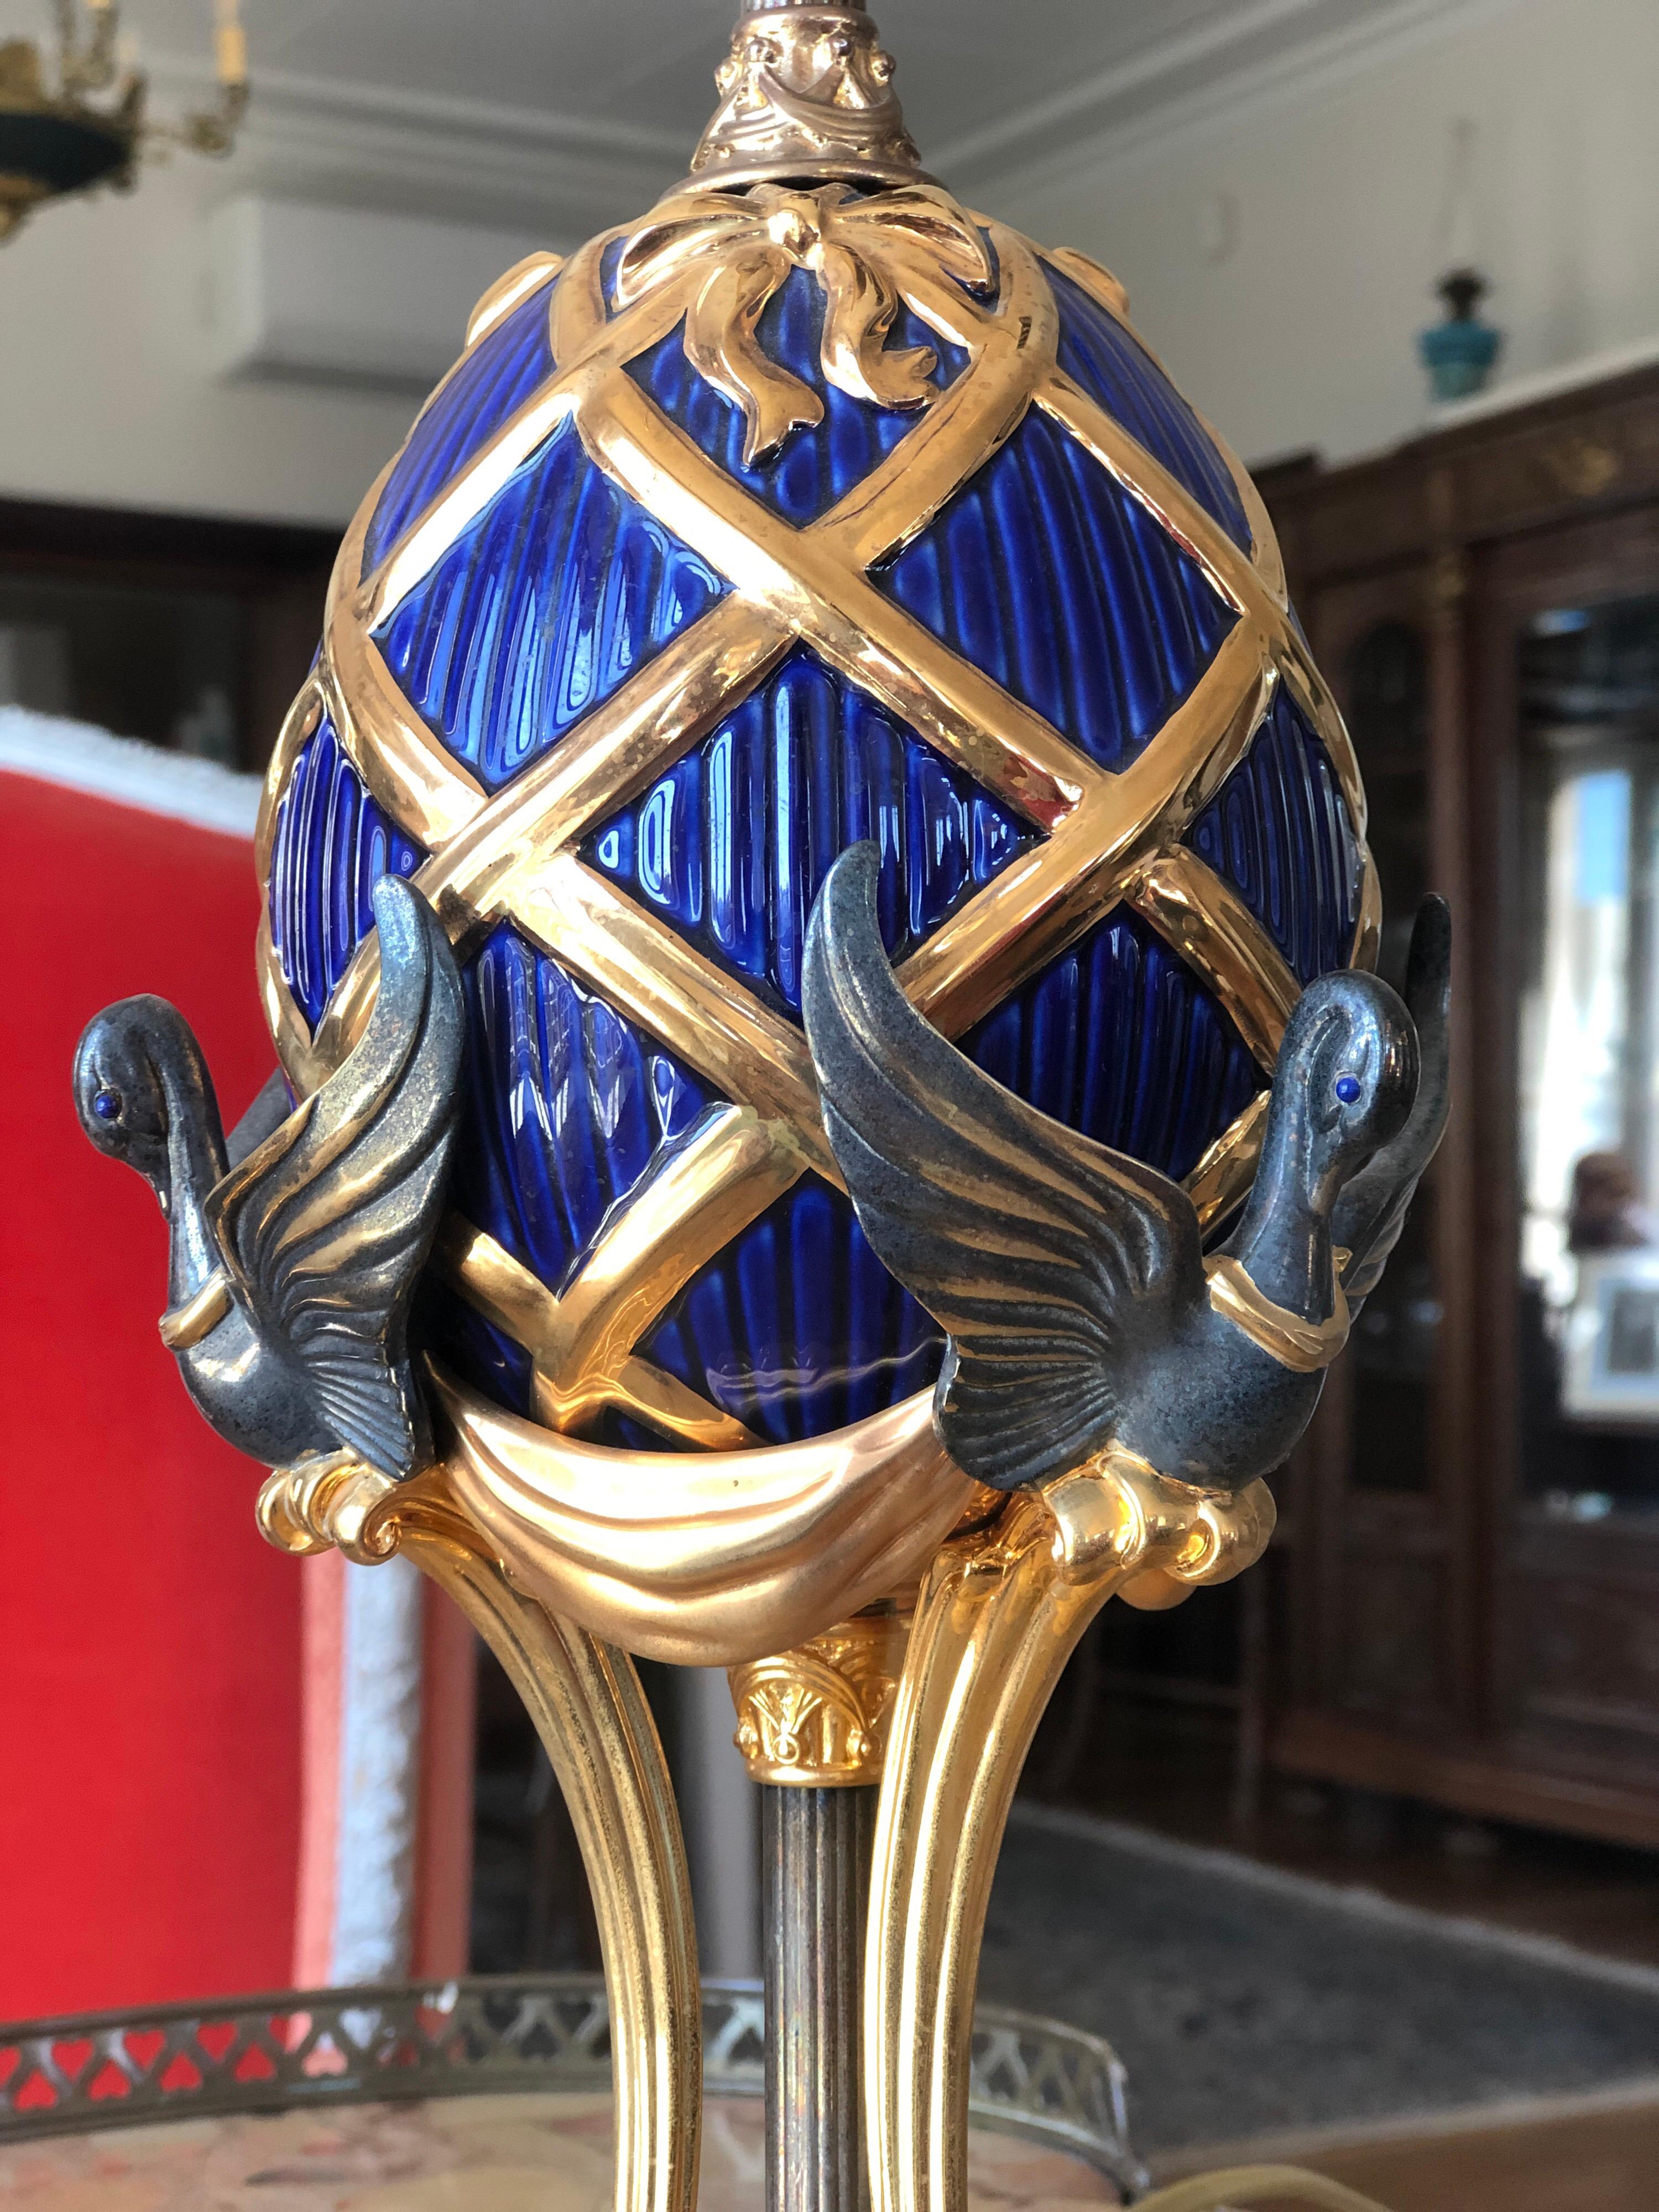 Rare Faberge egg form lamp made by the Franklin Mint in cooperation with the House of Faberge. The porcelian egg is highlighted by w24kt gold with silver plate swans with lapis eyes. It measures 9 1/2